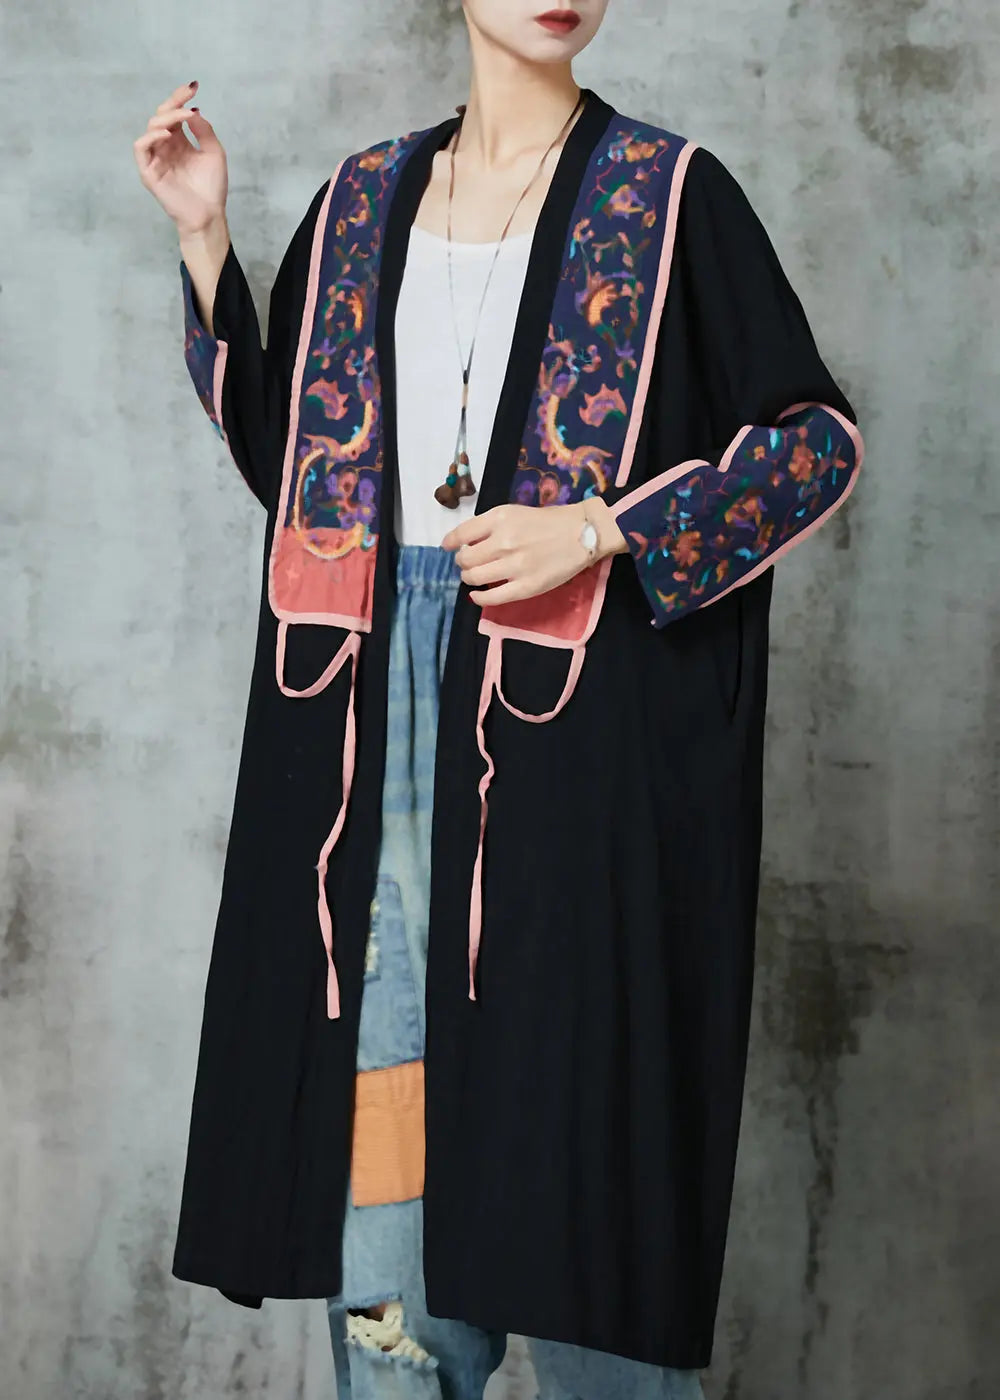 Black Linen Cardigans Embroidered Lace Up Spring Ada Fashion